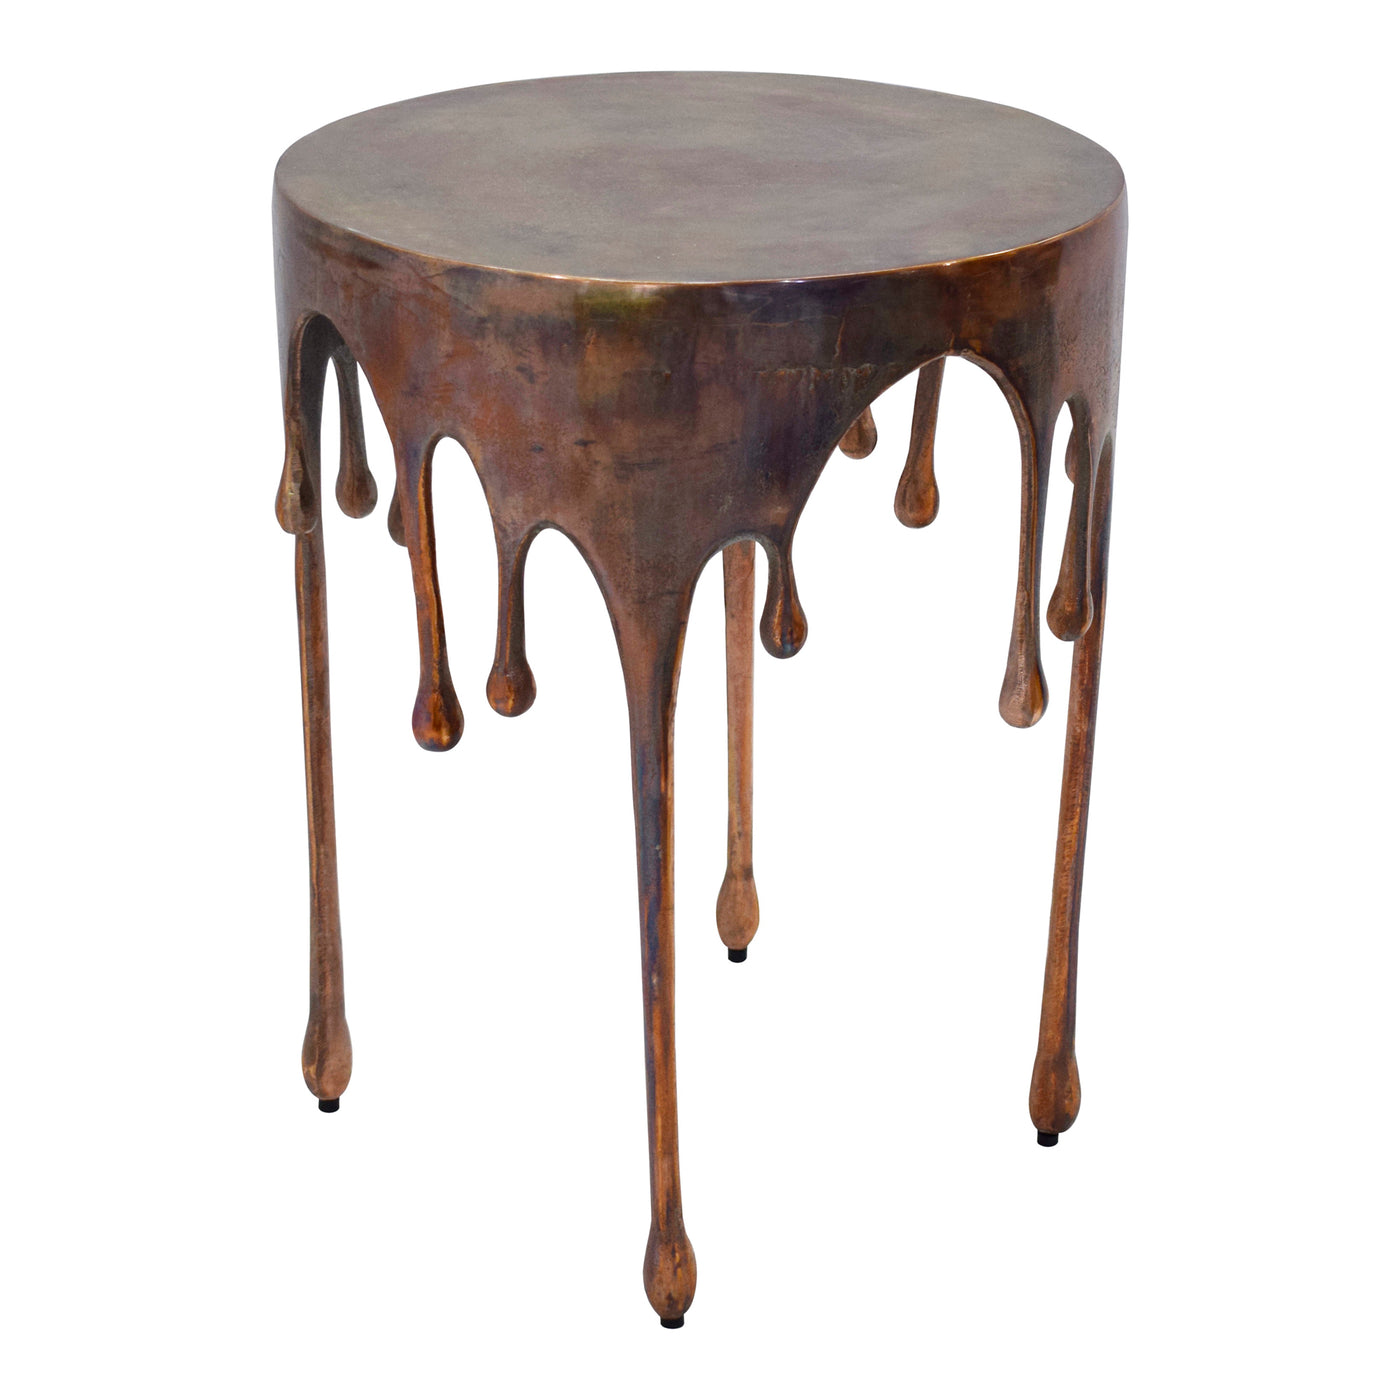 An accent table's standard look is thrown aside for a more unique look with the Copperworks accent table that presents its...